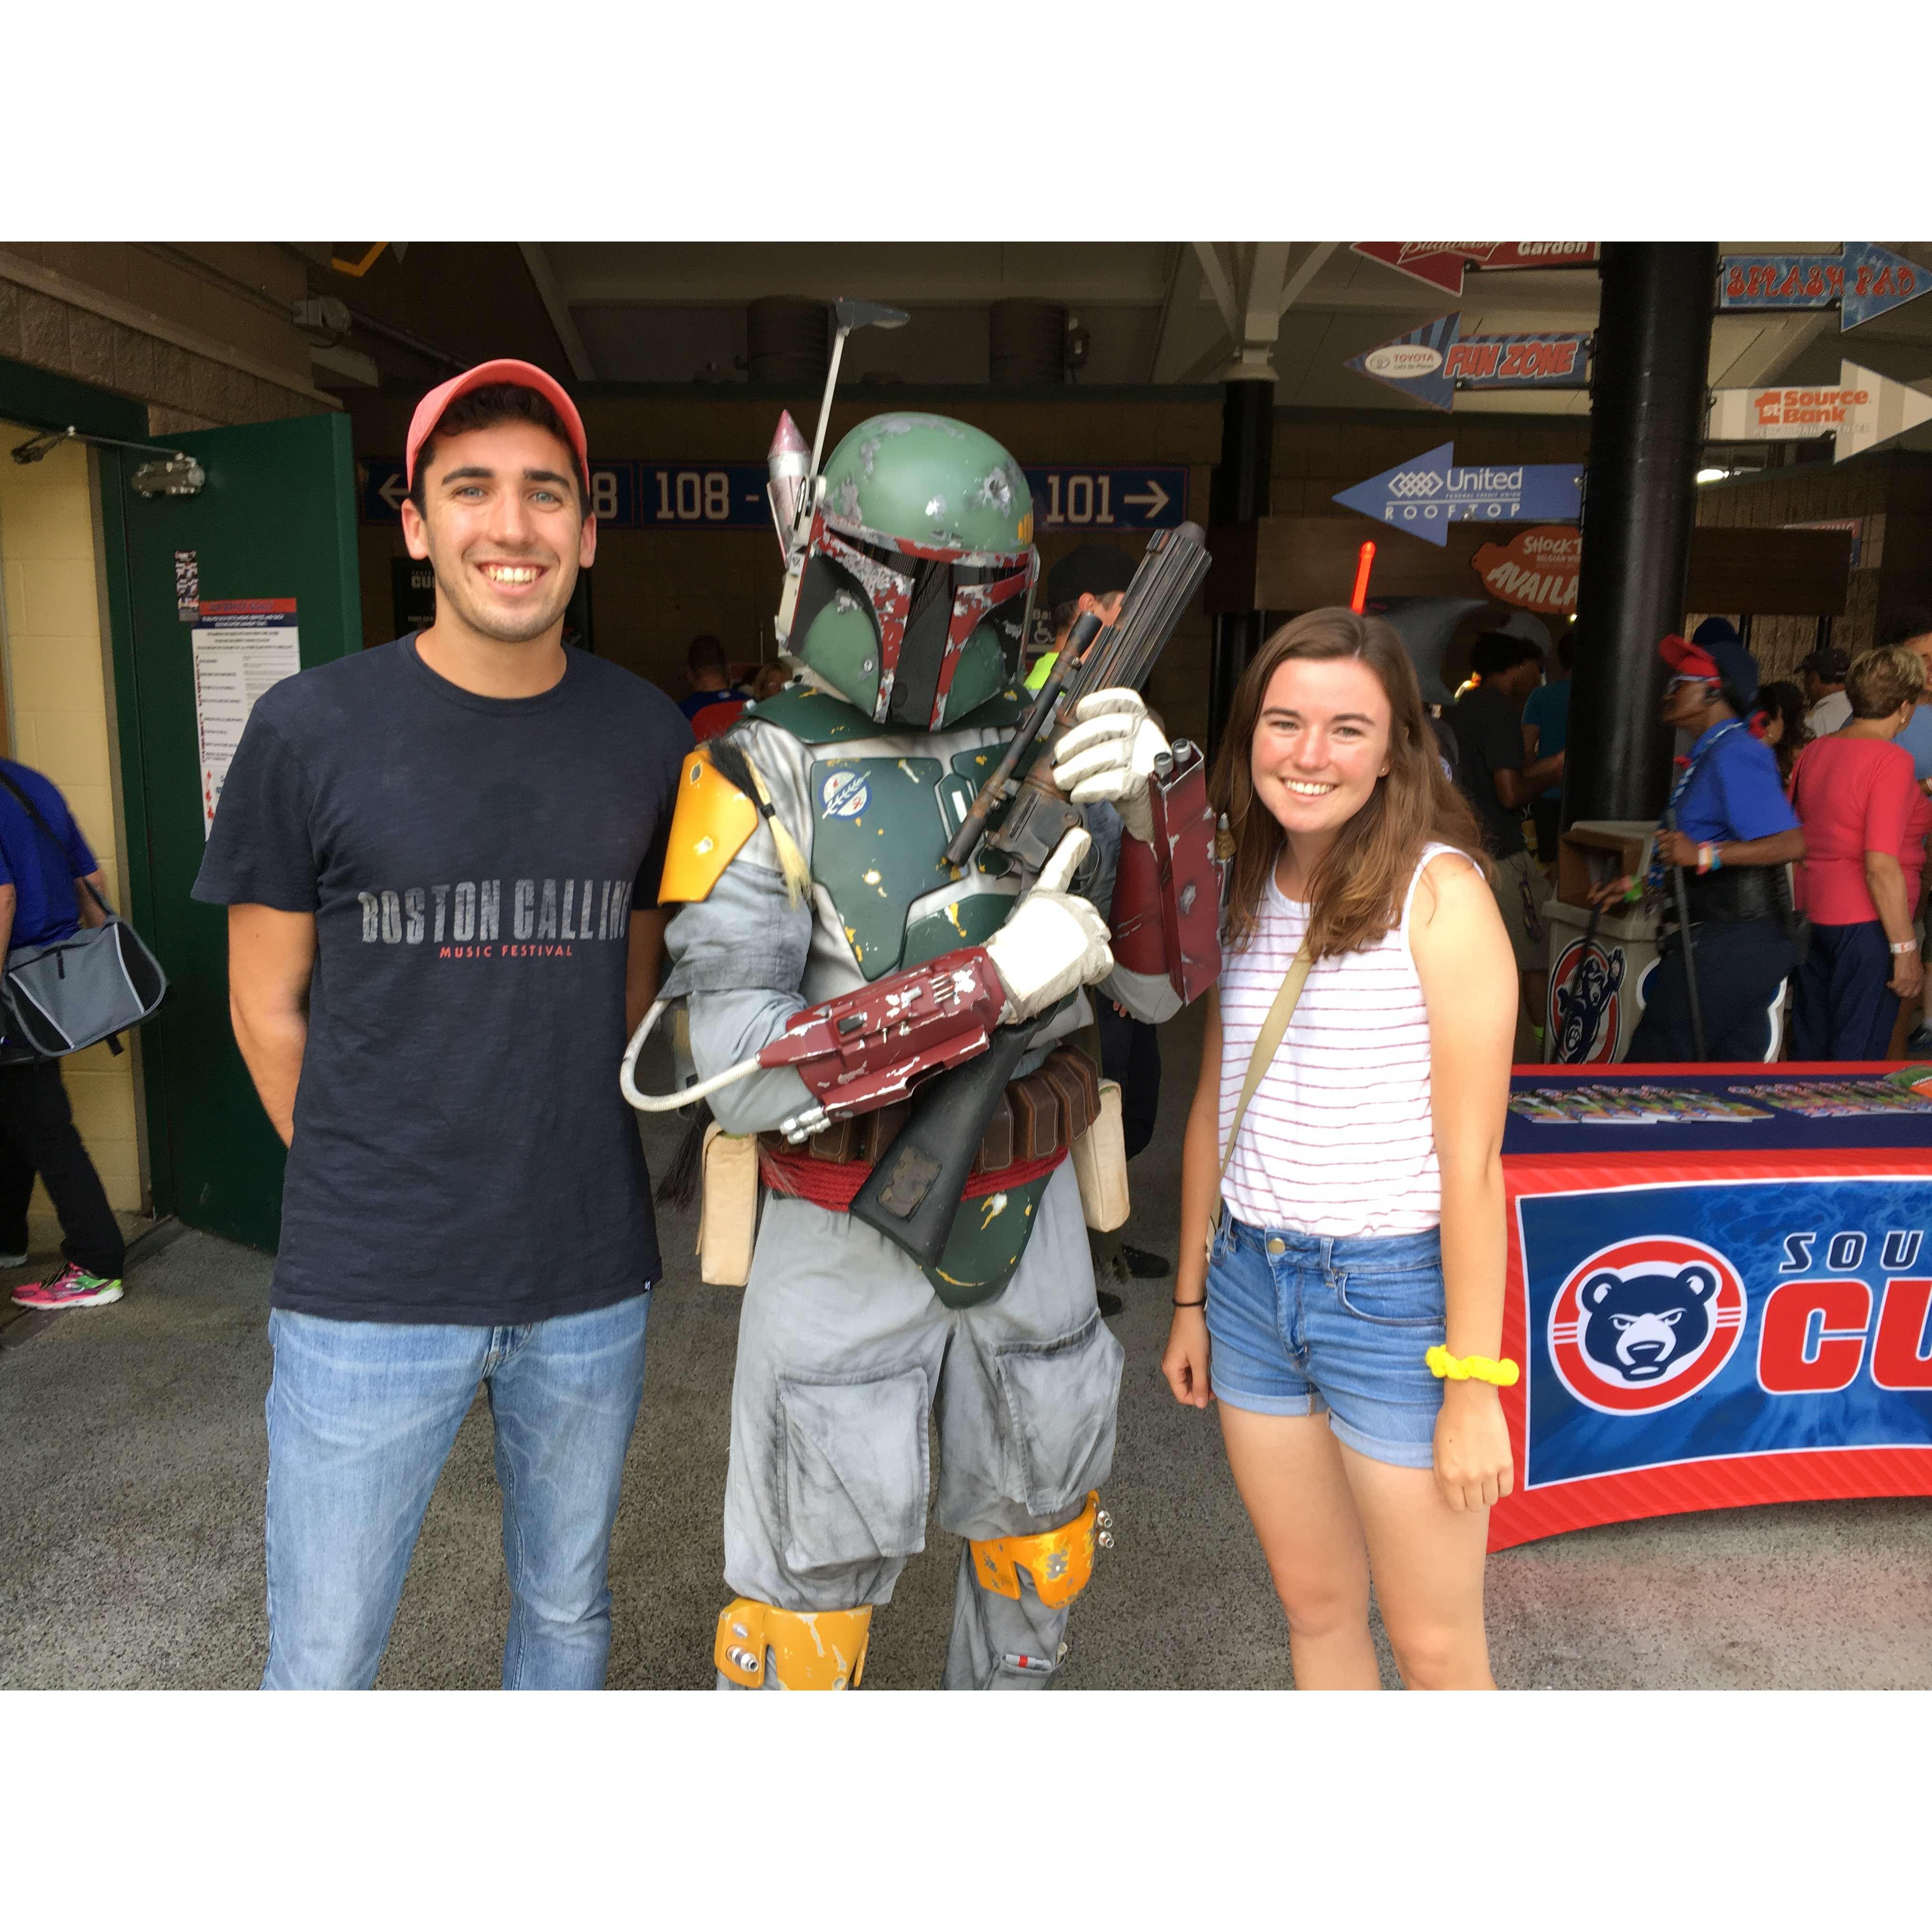 Star Wars night at a South Bend Cubs game